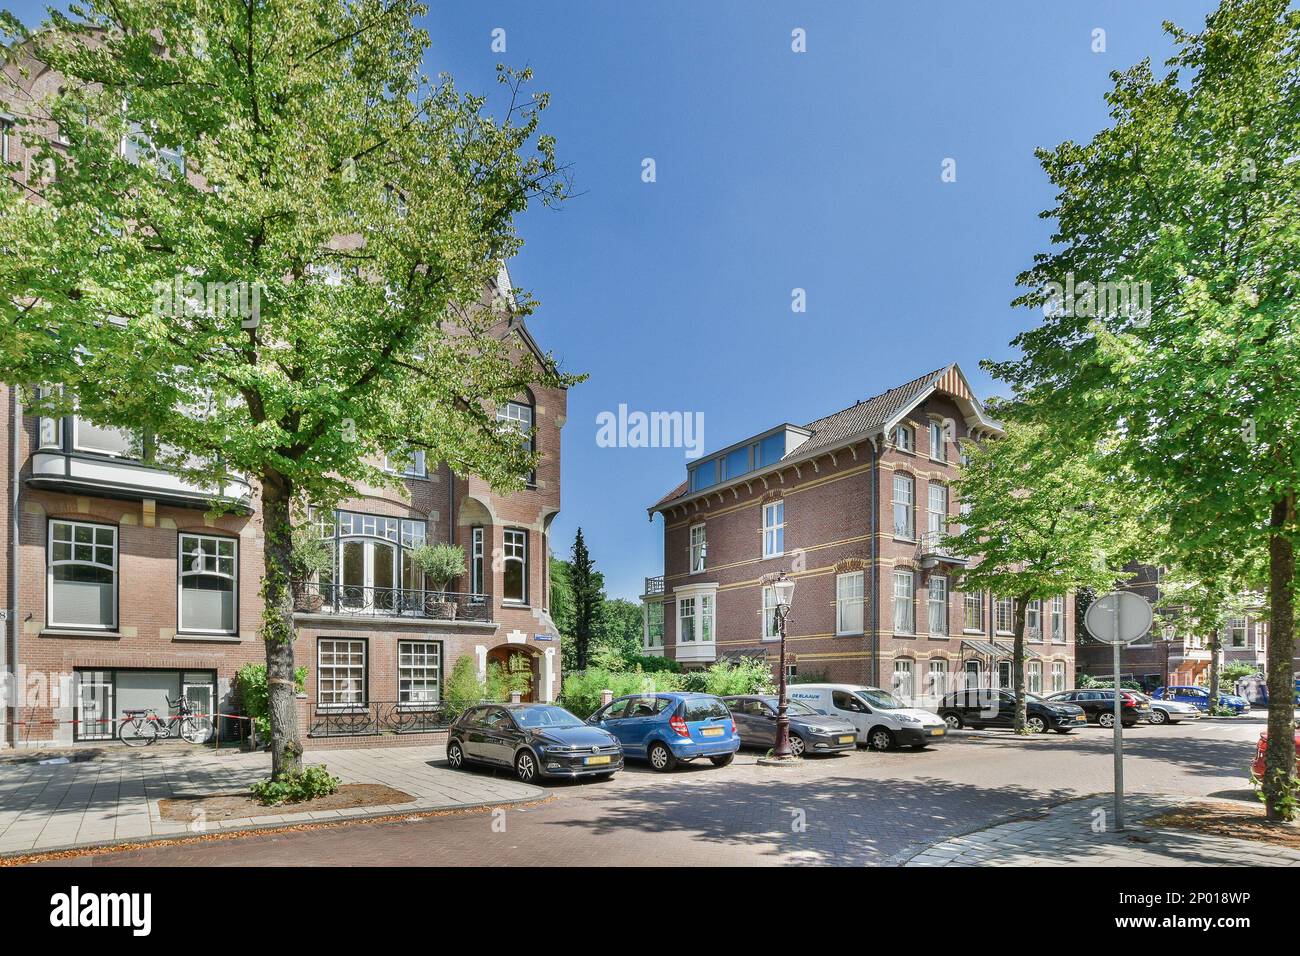 Amsterdam, Netherlands - 10 April, 2021: a city street with cars parked on the side and trees lining the street in front of buildings, all lined up against each other Stock Photo